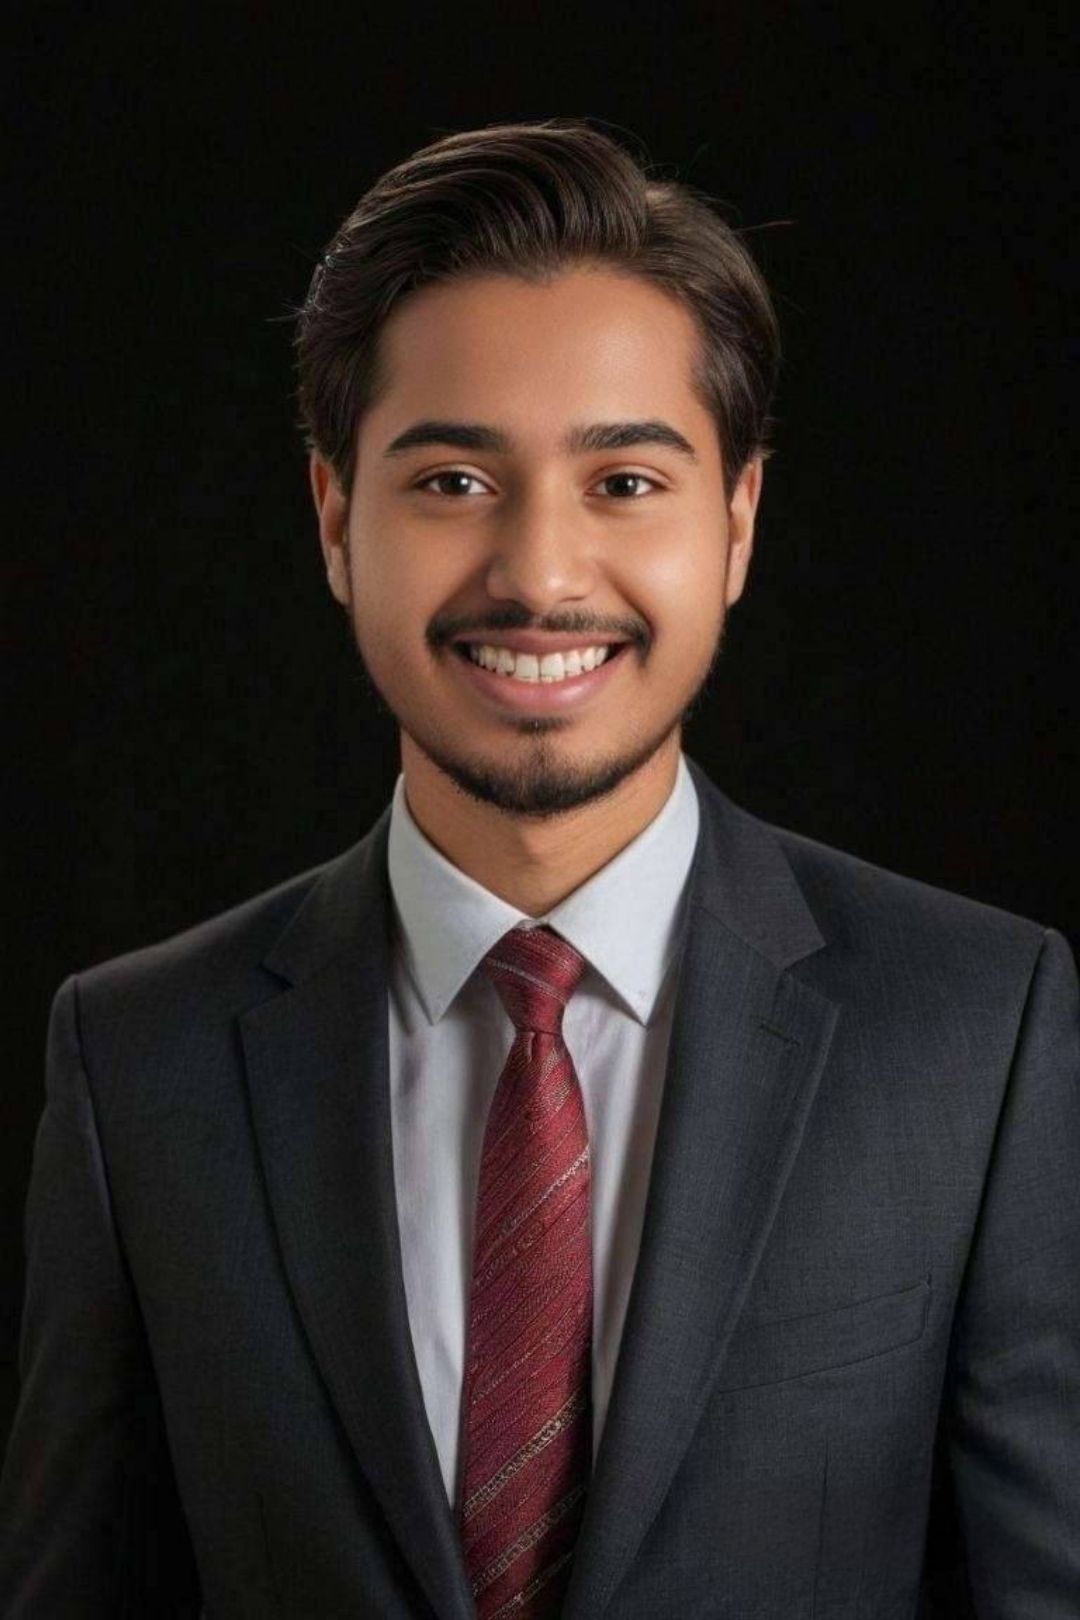 Ahsan Habib Muaz smiles confidently, wearing a black suit with a crisp white shirt and a red tie.